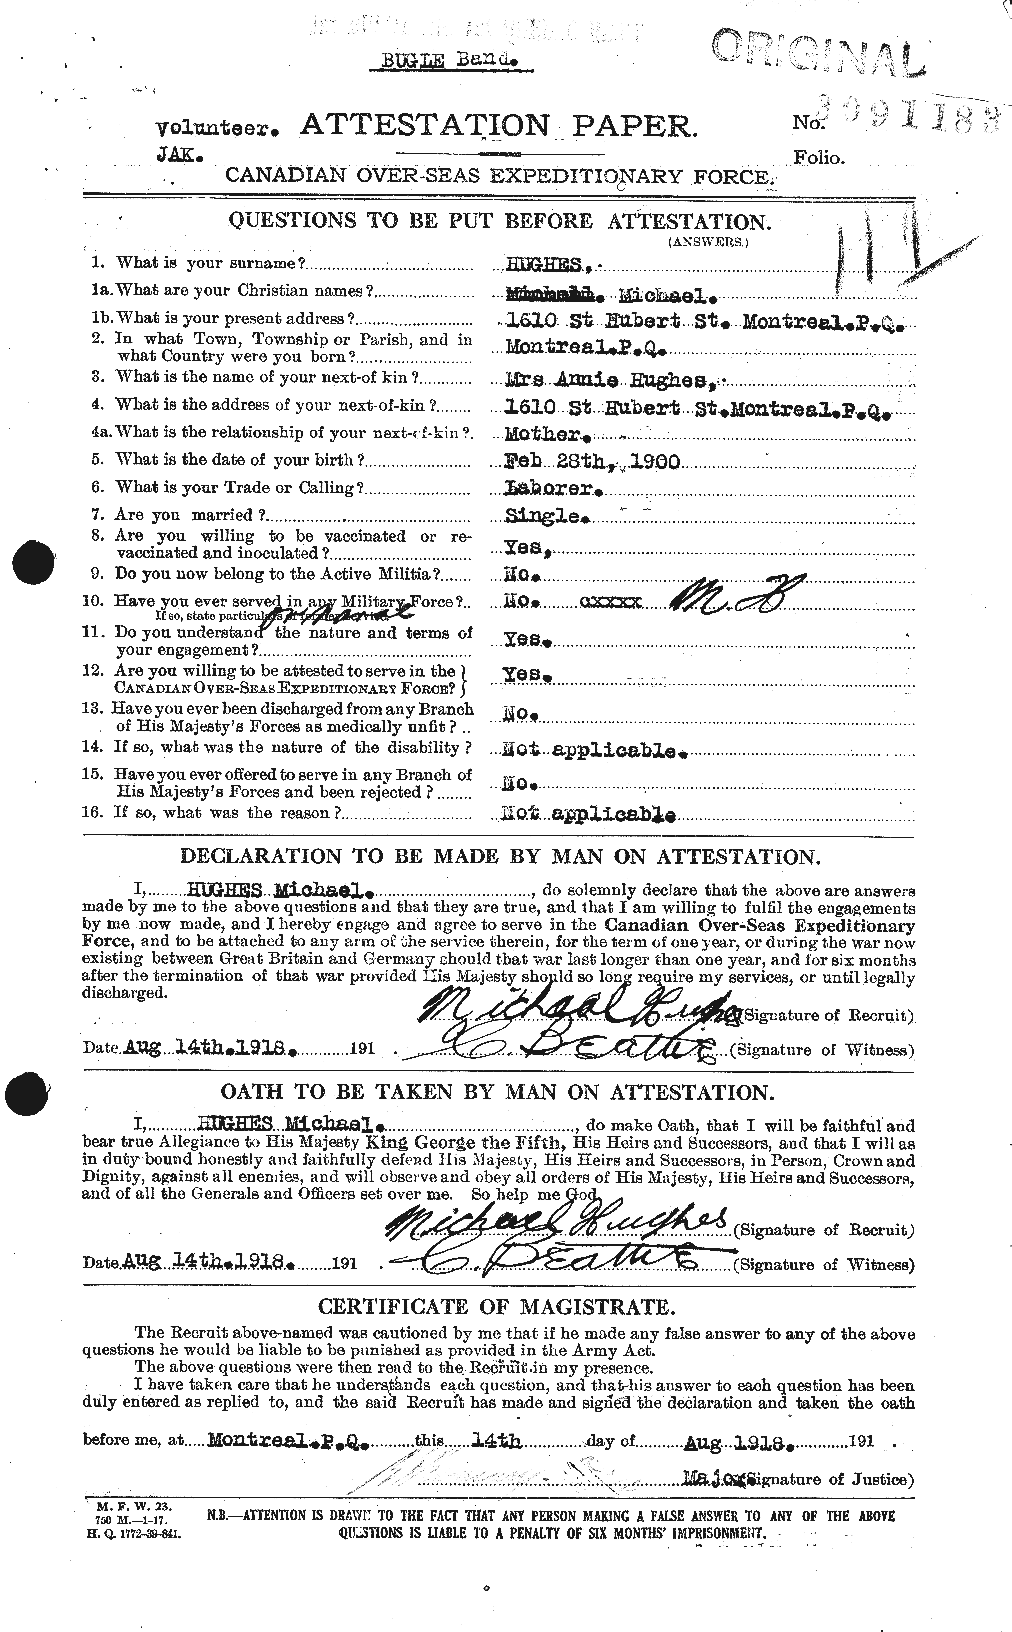 Personnel Records of the First World War - CEF 404120a